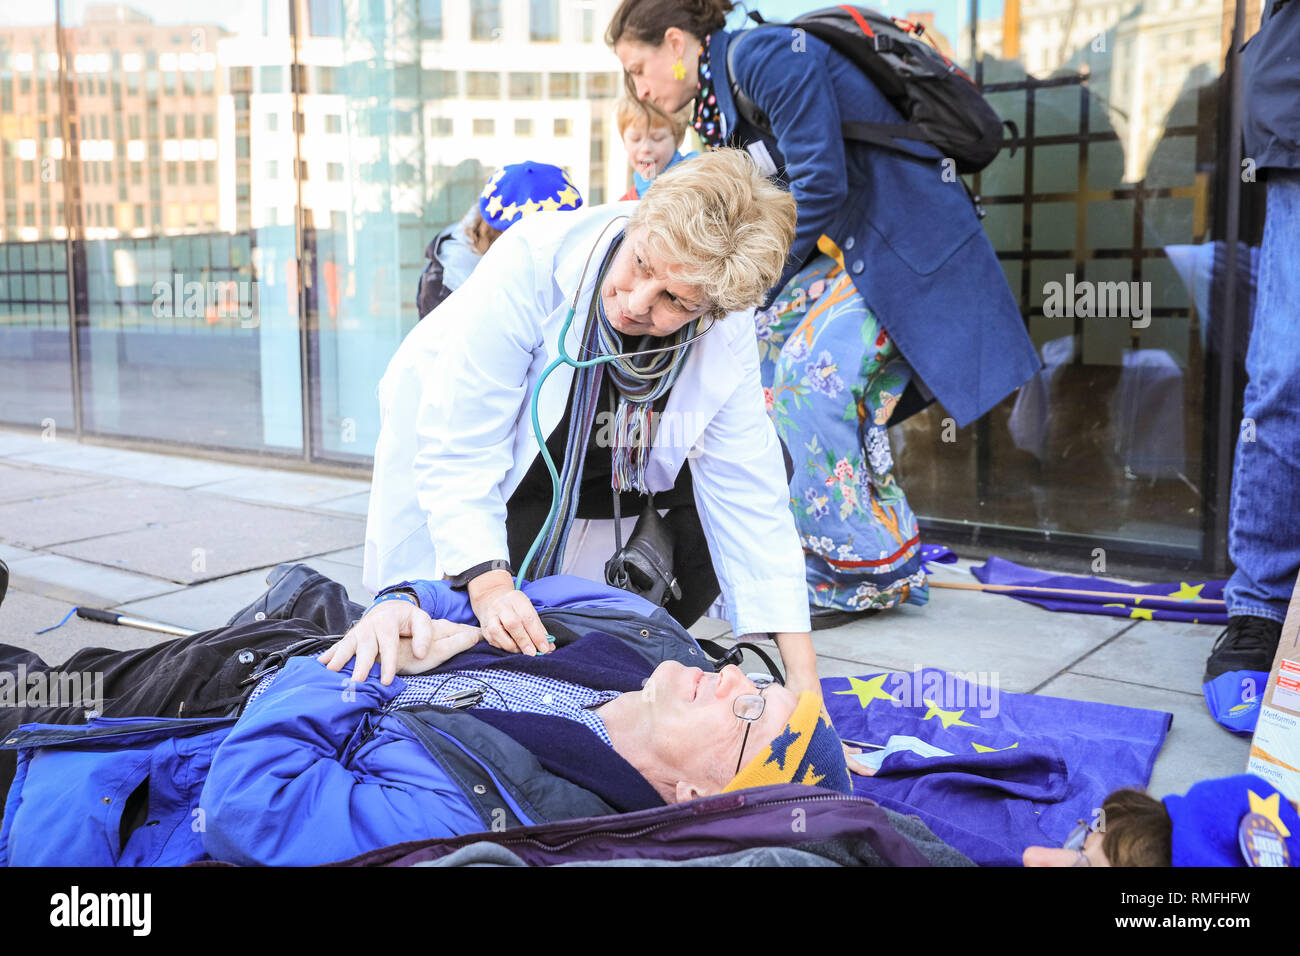 Department of Health, London, UK, 15th Feb 2019. Anti Brexit protesters lie down in death cloths, body bags and with their life saving medicines in front of the Department of Health. The group have organised a 'Death By Brexit' outside the Department of Health and Social Care in Westminster, London. The protest aims to highlight the risk of medical supplies in case of a no deal Brexit, and potential dangers to the health and lifes of those who depend on medicines imported from Europe. Credit: Imageplotter News and Sports/Alamy Live News Stock Photo